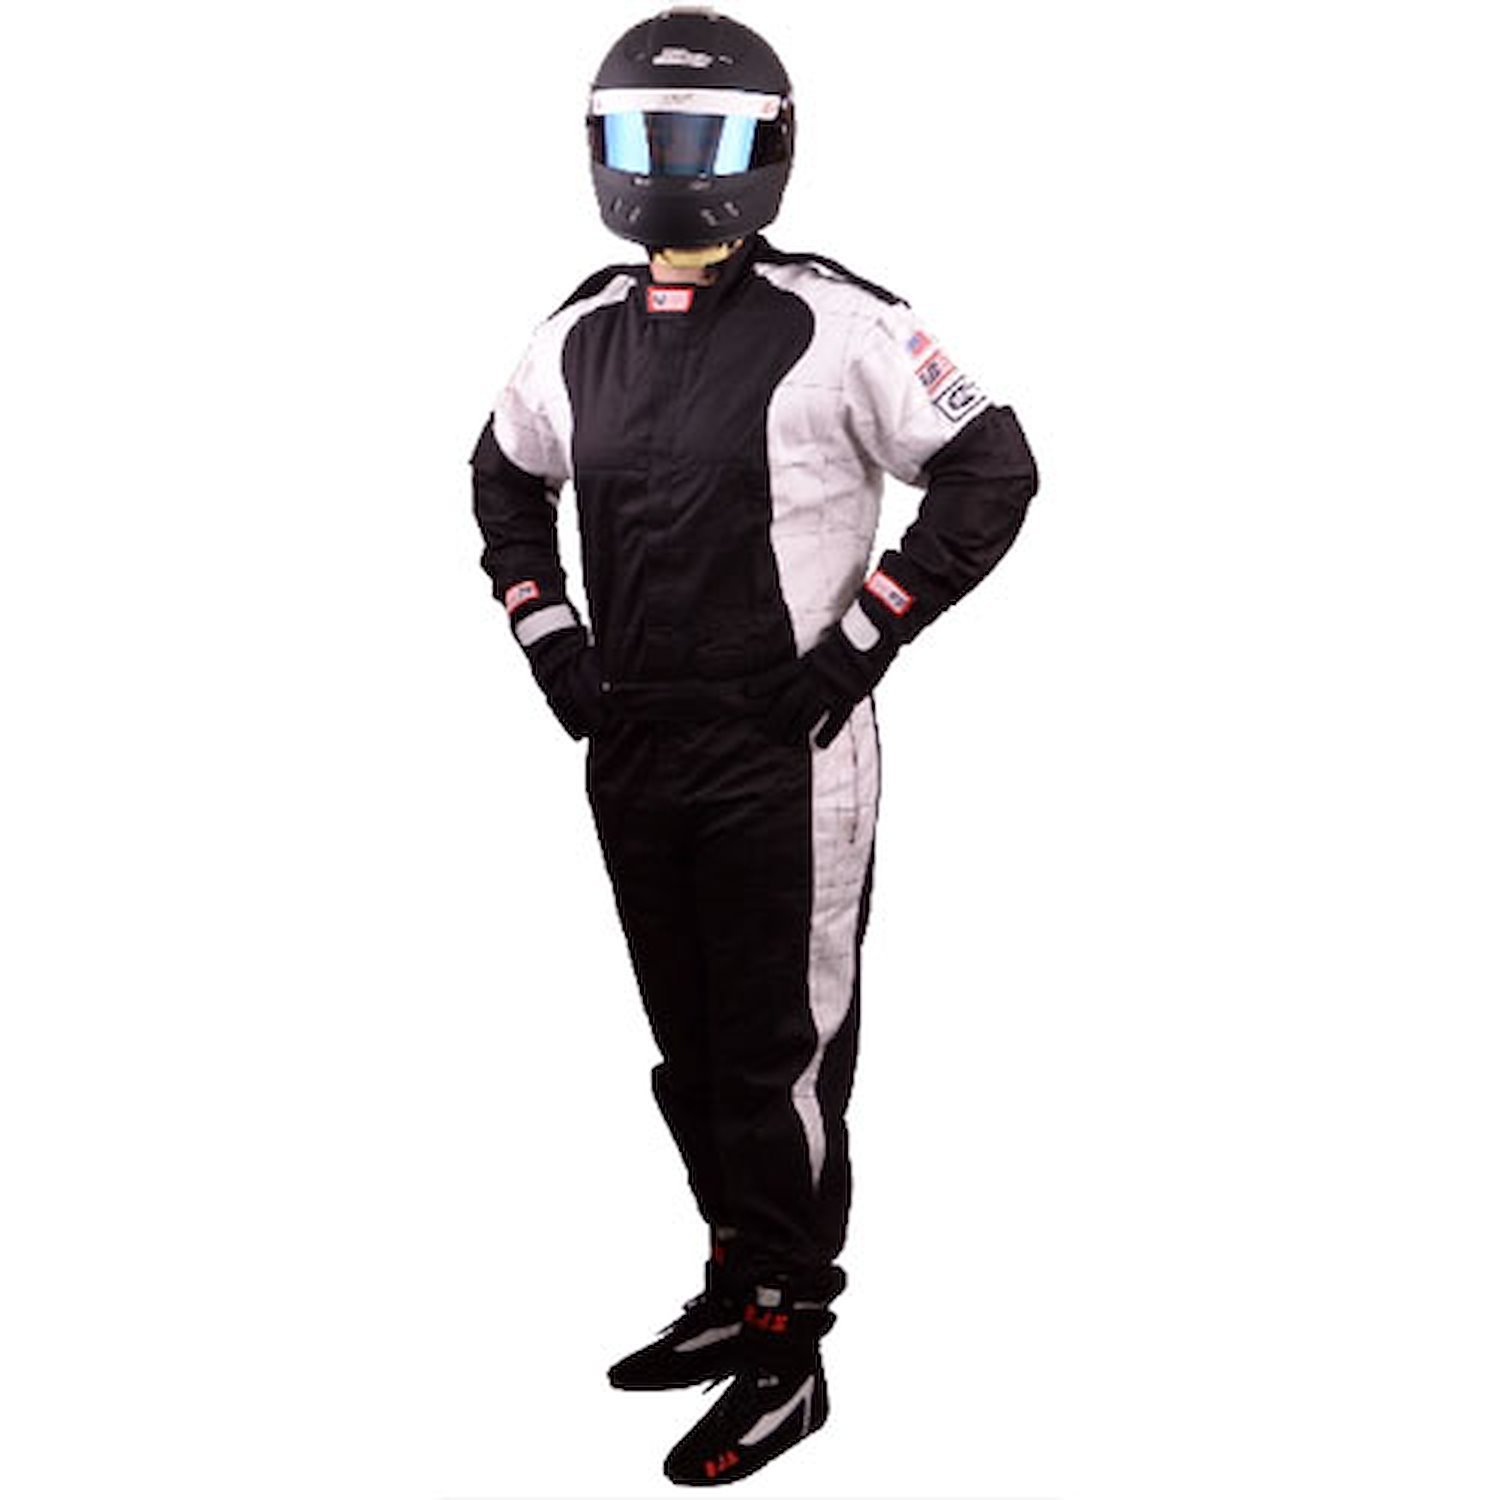 Elite Series Driving Suit 3.2 A/5 SFI Rating